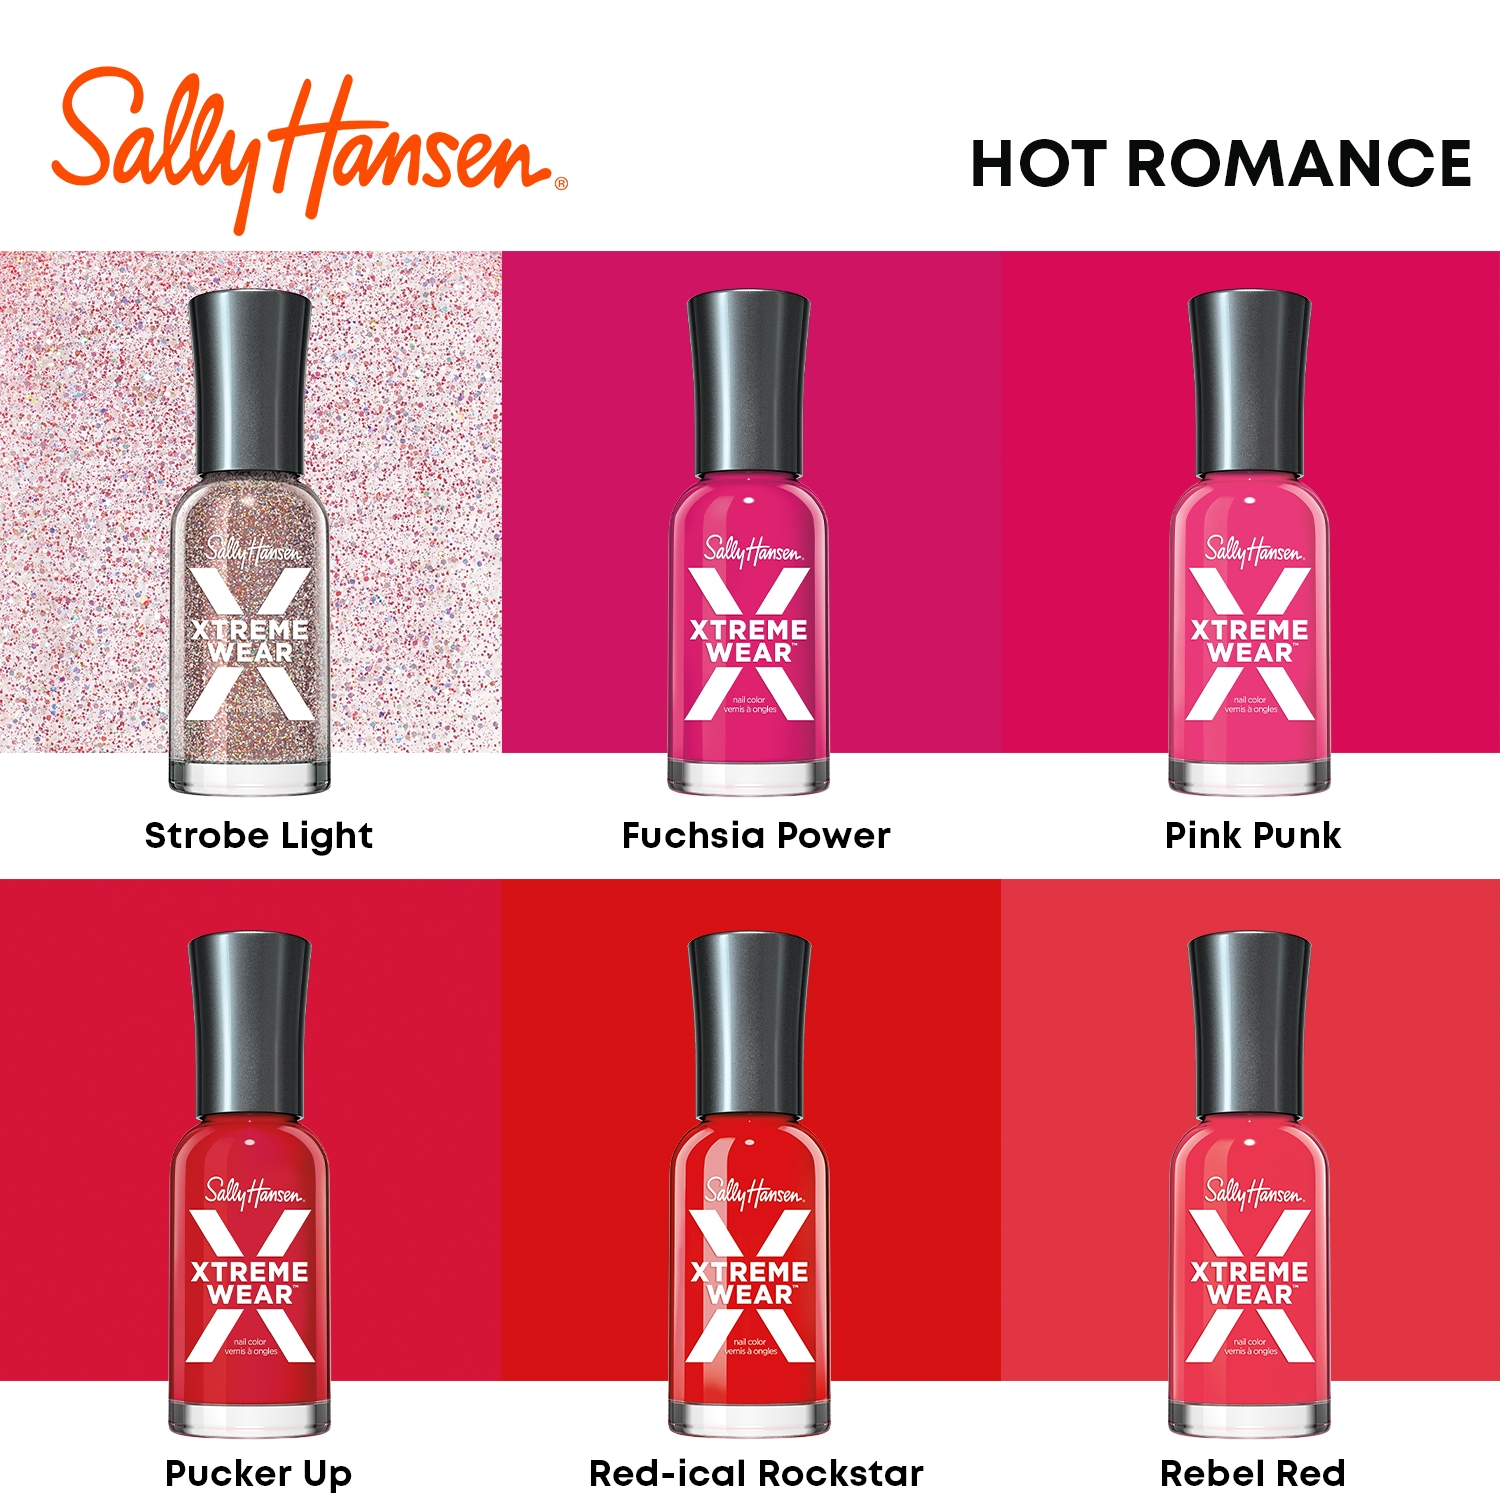 Sally Hansen Xtreme Wear Nail Color, Rebel Red, 0.4 oz, Color Nail Polish, Nail Polish, Quick Dry Nail Polish, Nail Polish Colors, Chip Resistant, Bold Color - image 6 of 14